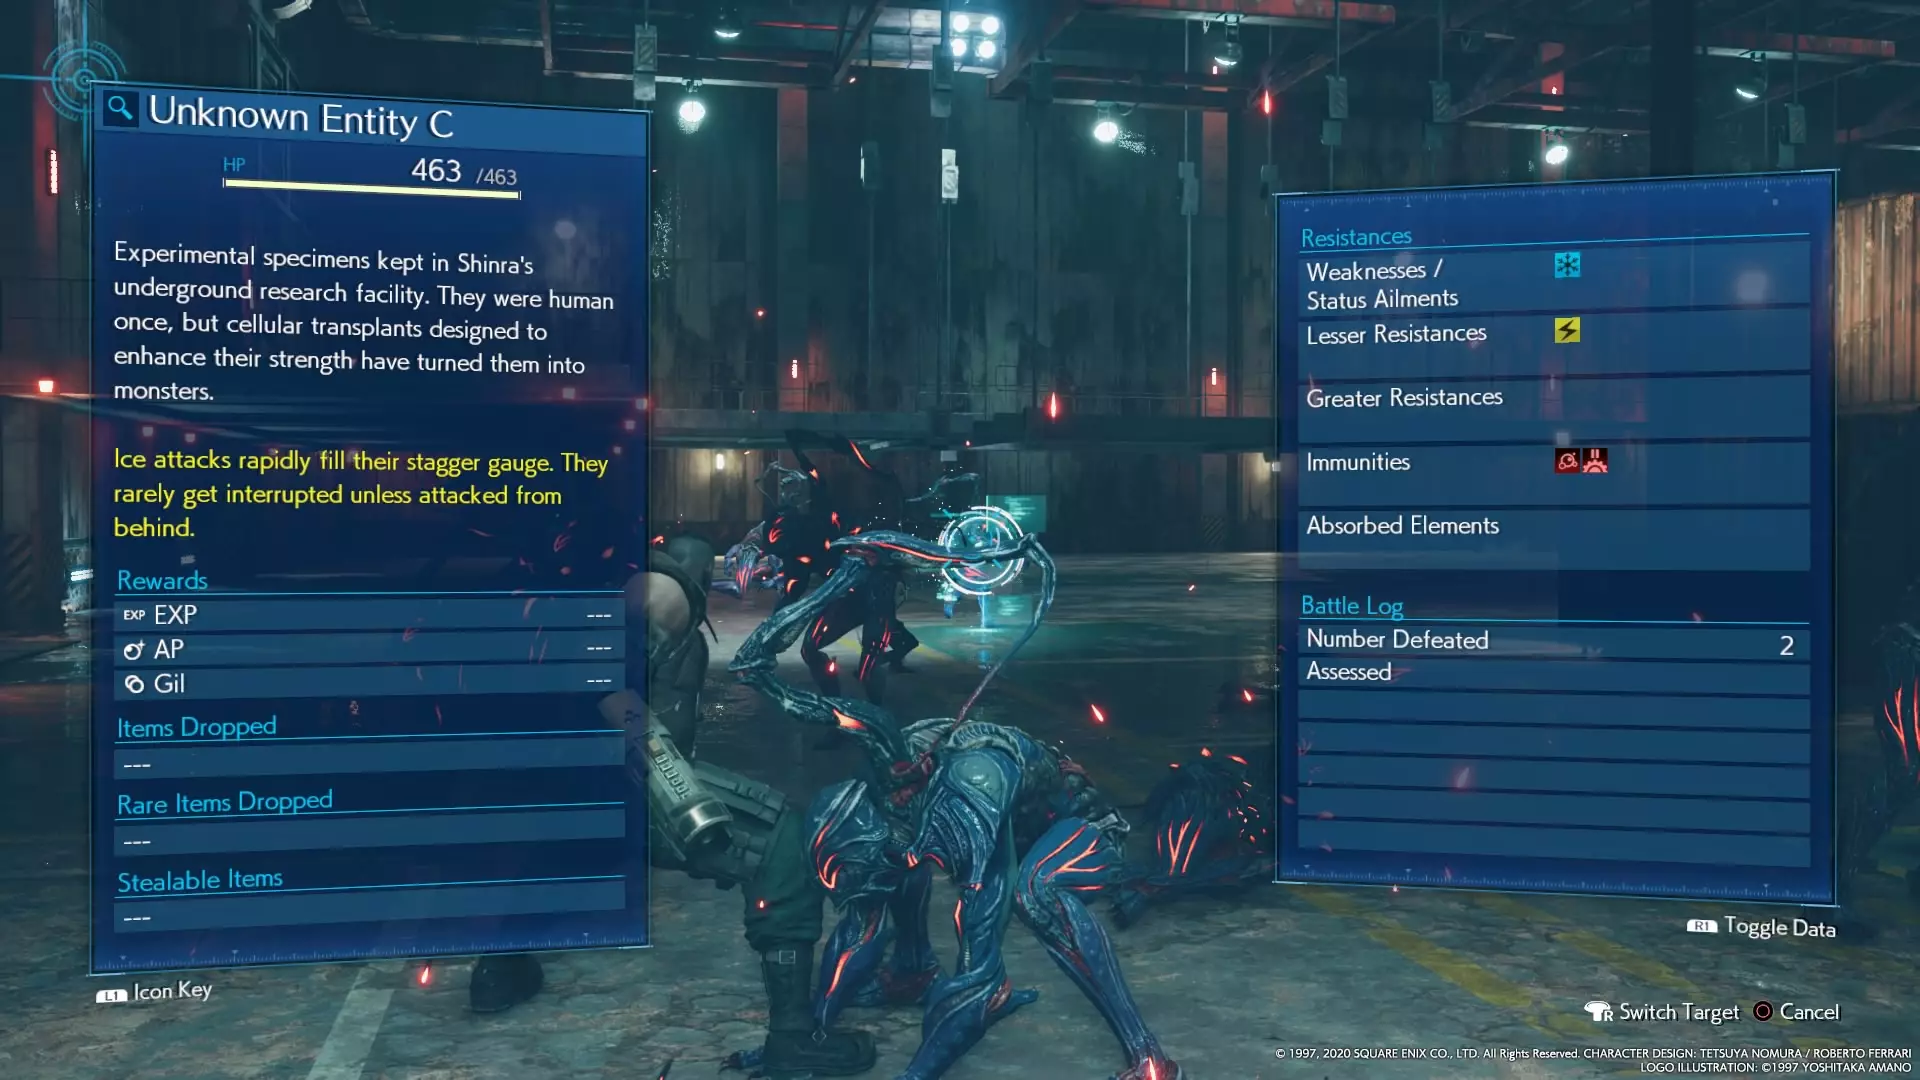 Assessing an enemy in Final Fantasy VII Remake /